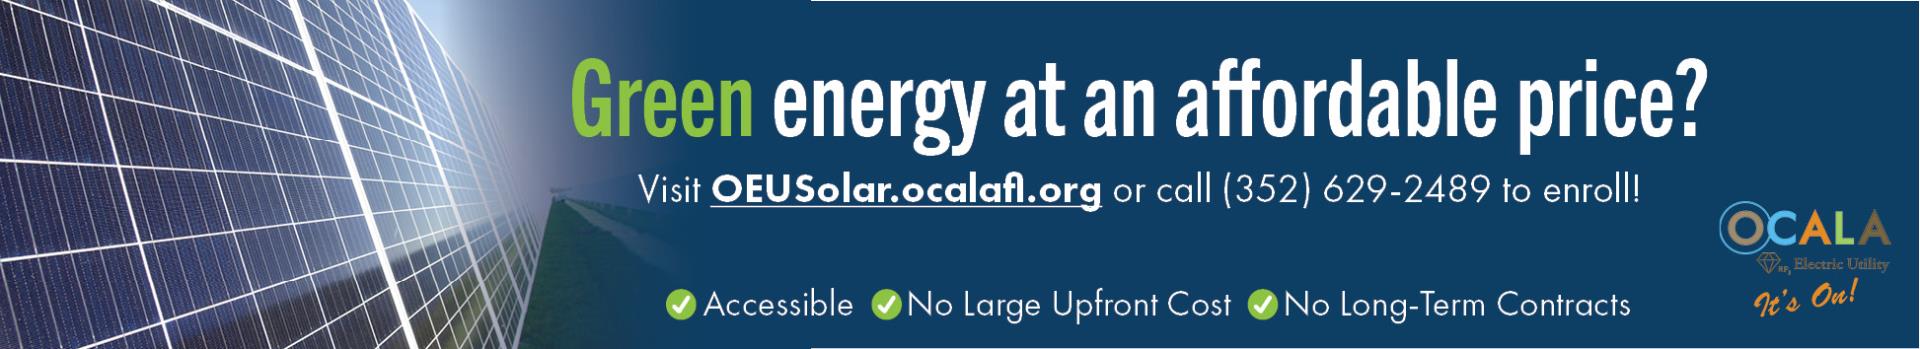 Green energy at an affordable price? Visit OEUSolar.ocalafl.org or caall (352) 629-2489 to enroll! Accessible, No Large Upfront Cost, No Long-Term Contracts.